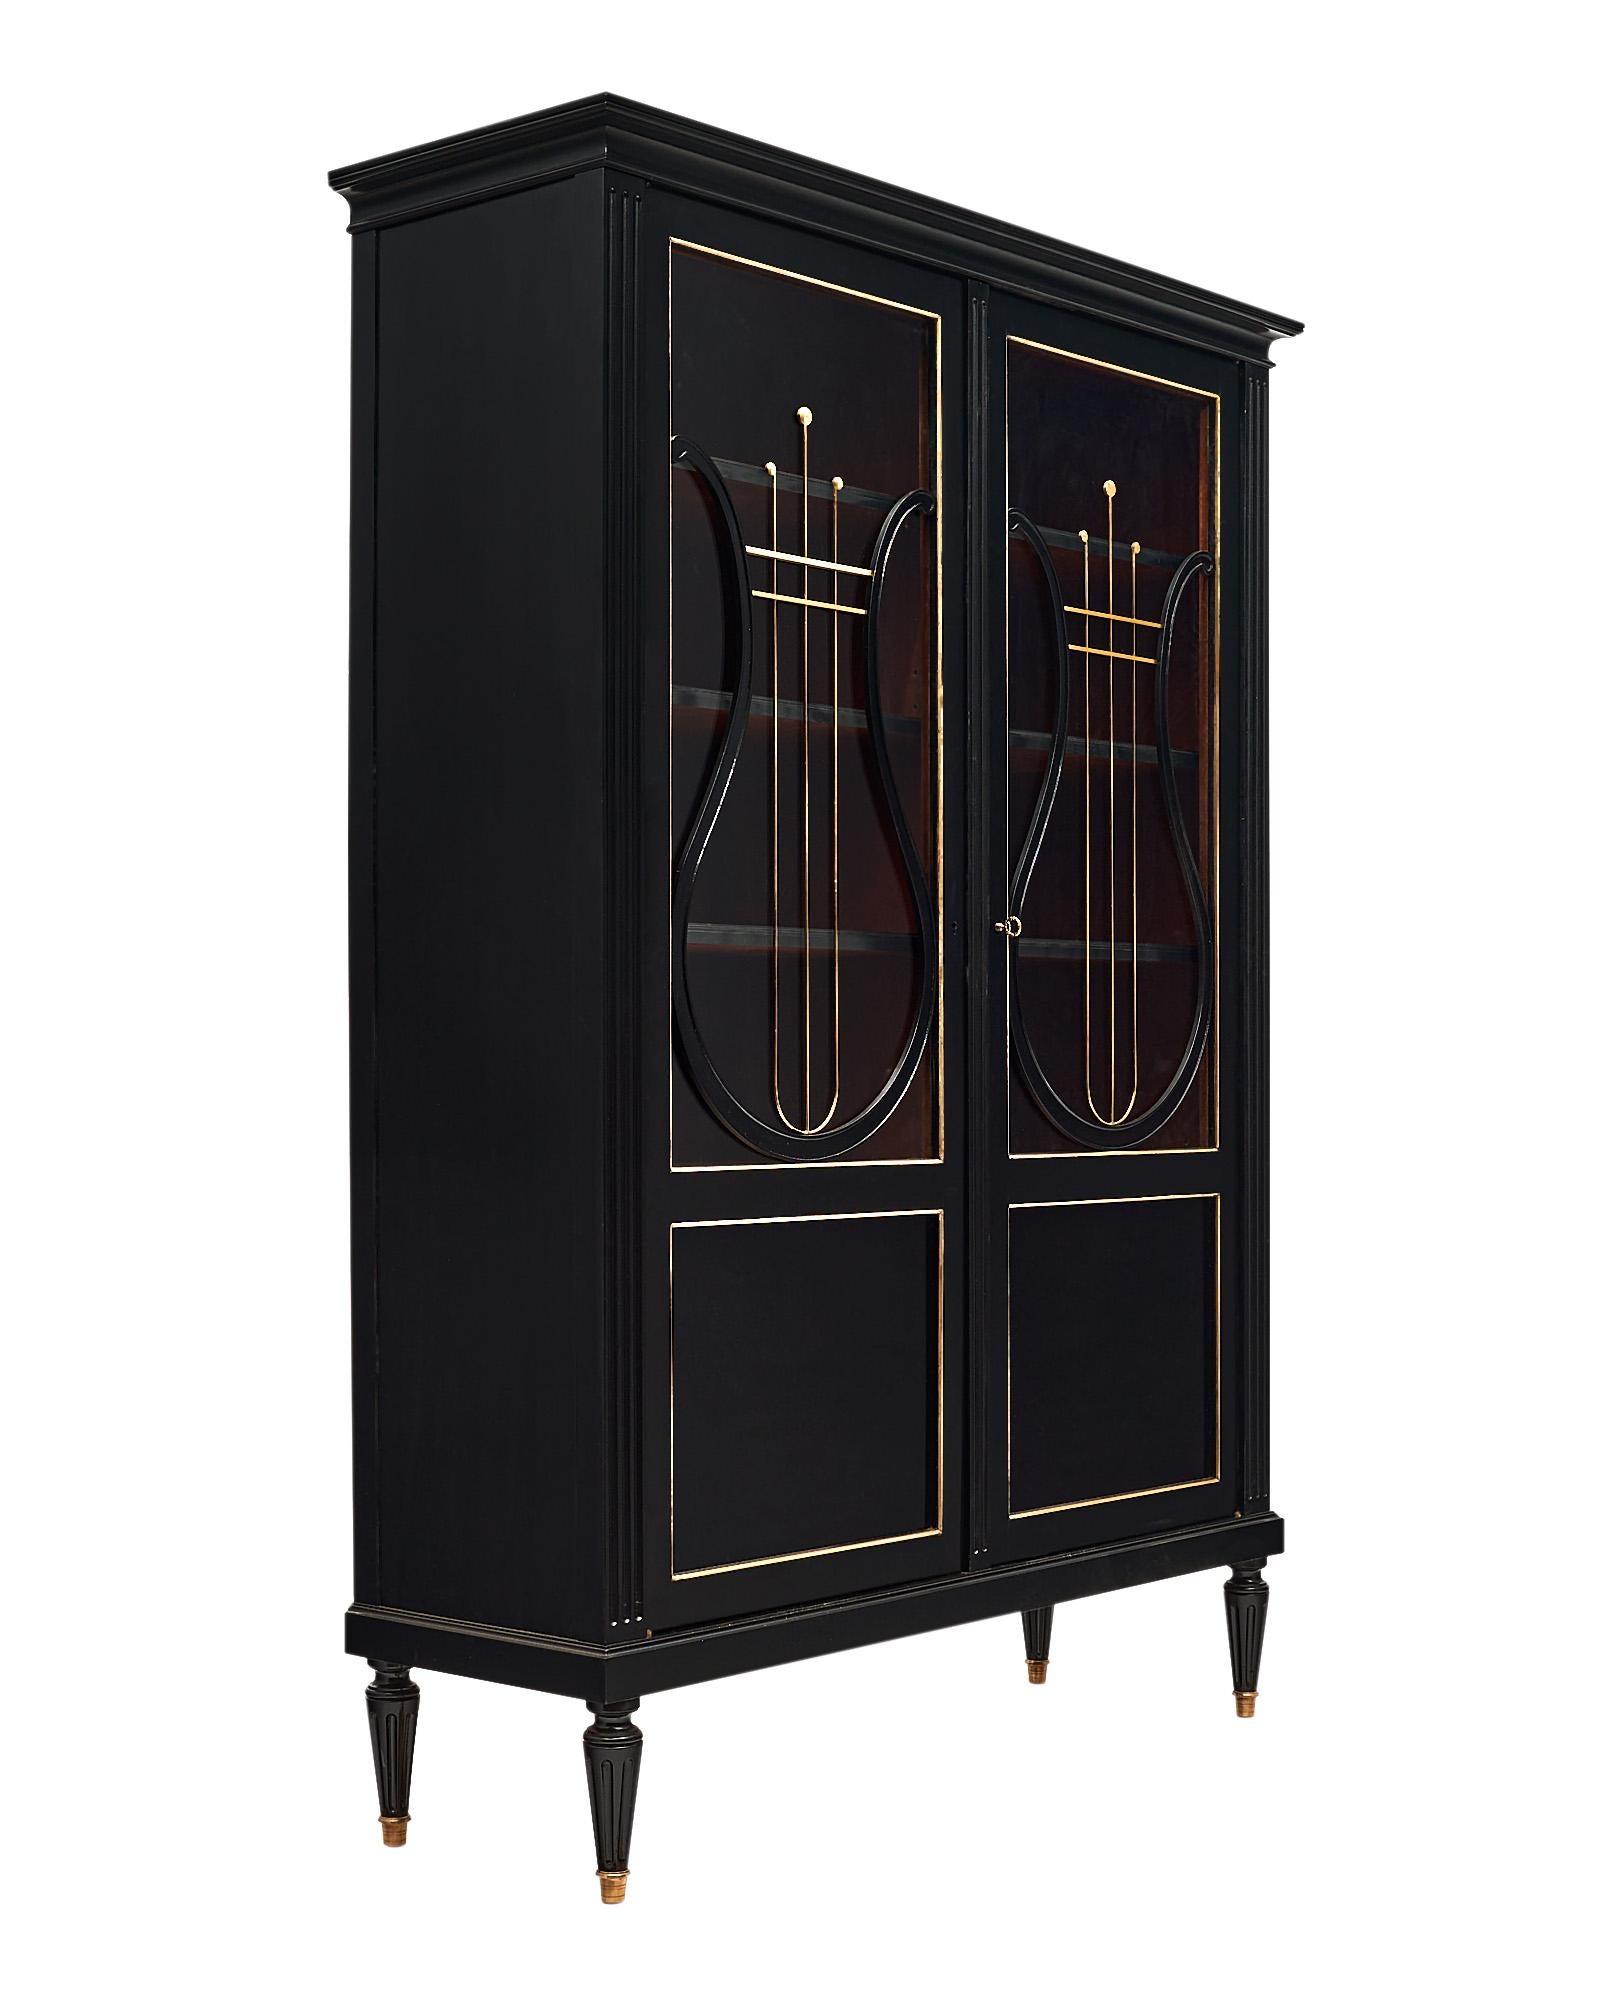 Bookcase “vitrine”, French, made of mahogany that has two glass doors featuring stylized harps. The doors open up to interior shelving. There is gilt brass trim throughout and this piece is finished with an ebonized French polish for luster.
